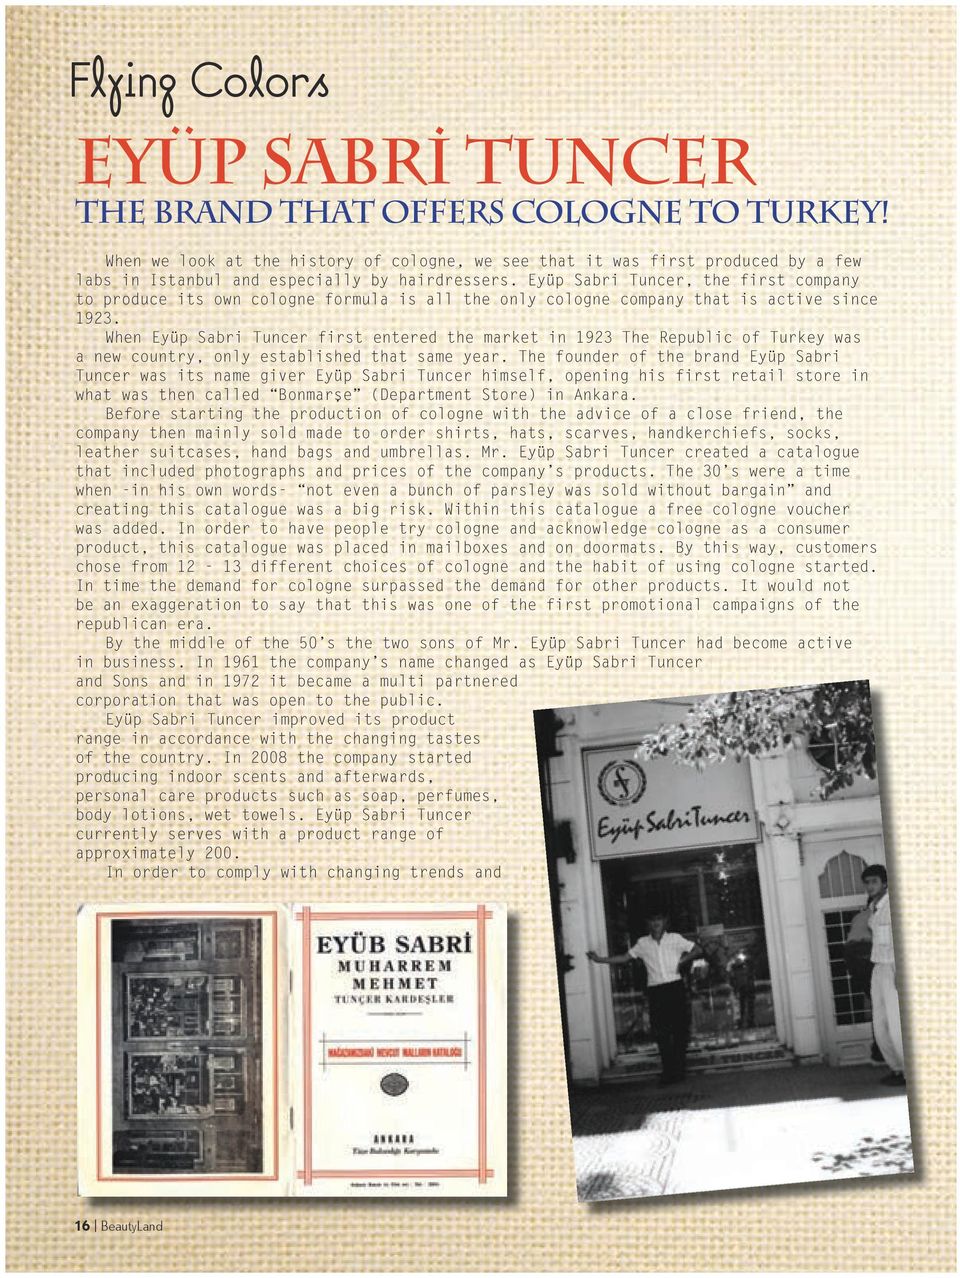 Eyüp Sabri Tuncer, the first company to produce its own cologne formula is all the only cologne company that is active since 1923.